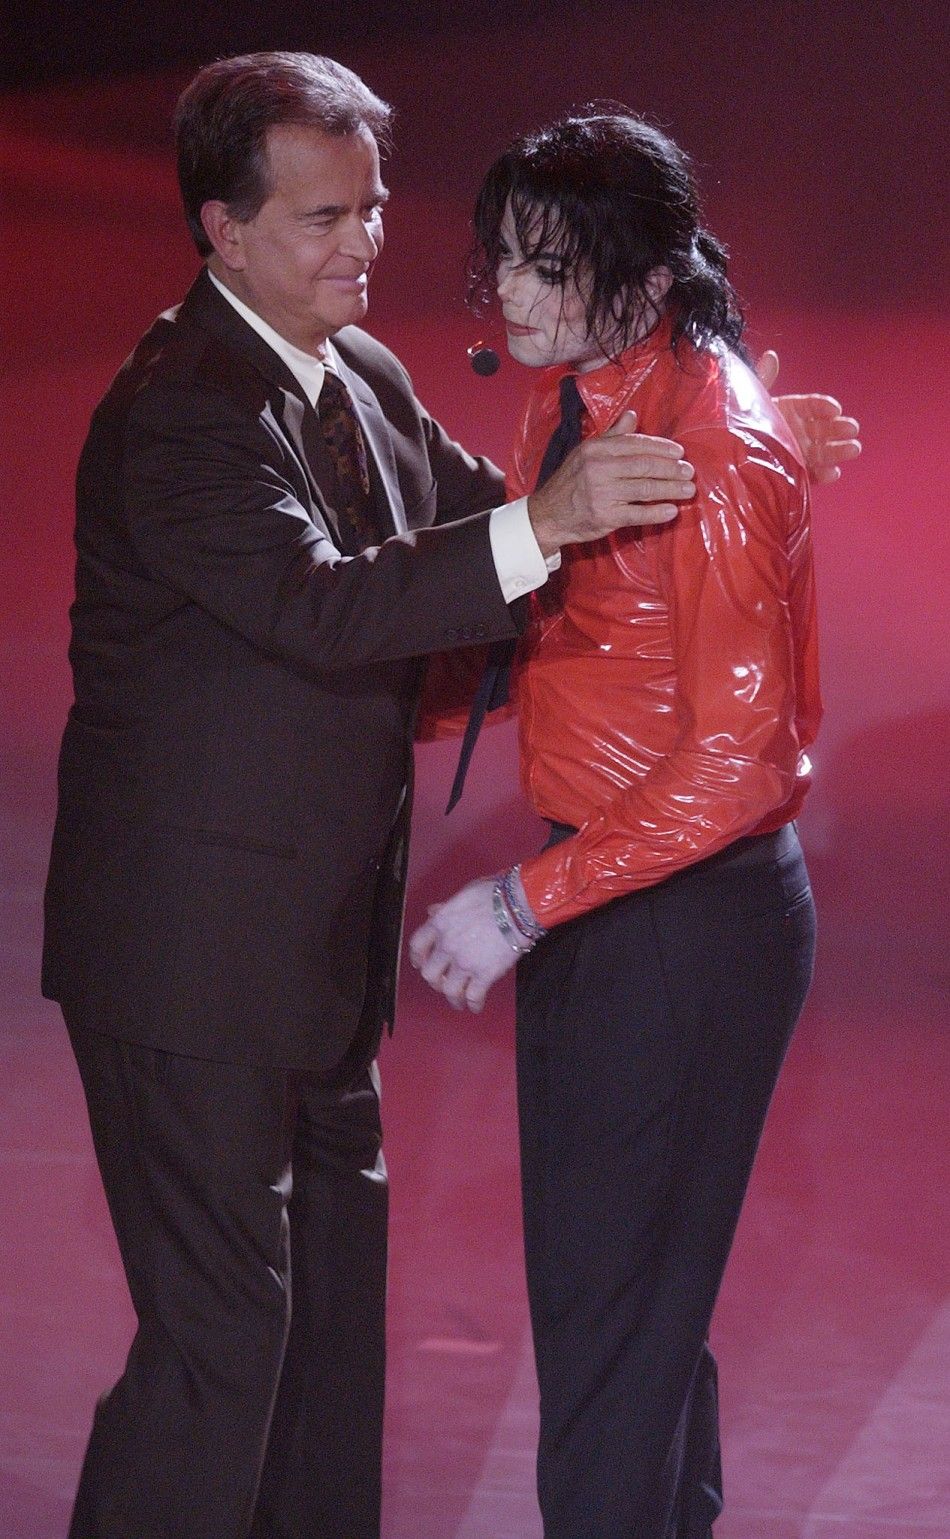 Singer Michael Jackson R is thanked by Dick Clark, host of quotAmerican Bandstands 50th...A Celebrationquot after performing quotDangerousquot for the show in Pasadena, California, April 20, 2002.